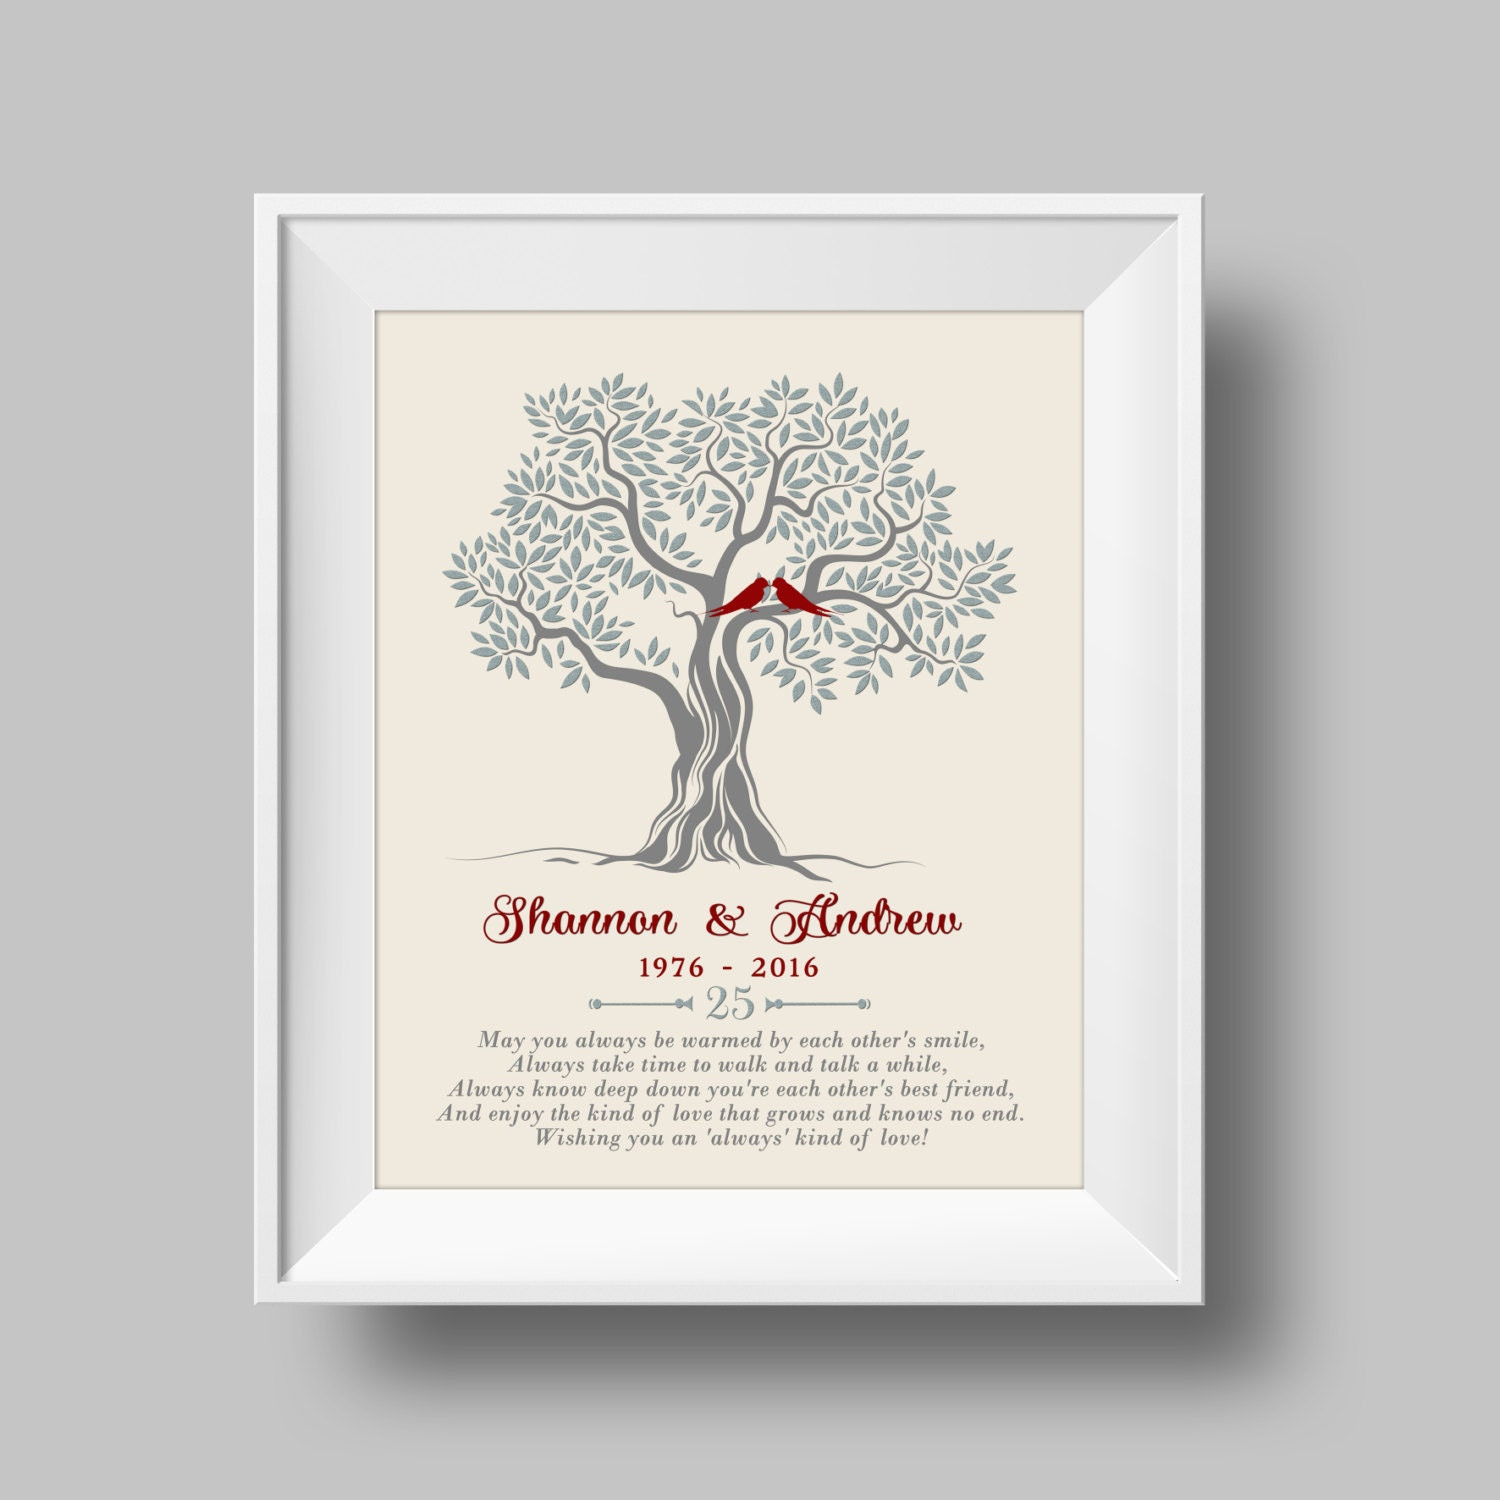 25Th Wedding Anniversary Gift Ideas For Parents
 View 25Th Wedding Anniversary Gift Ideas For Parents